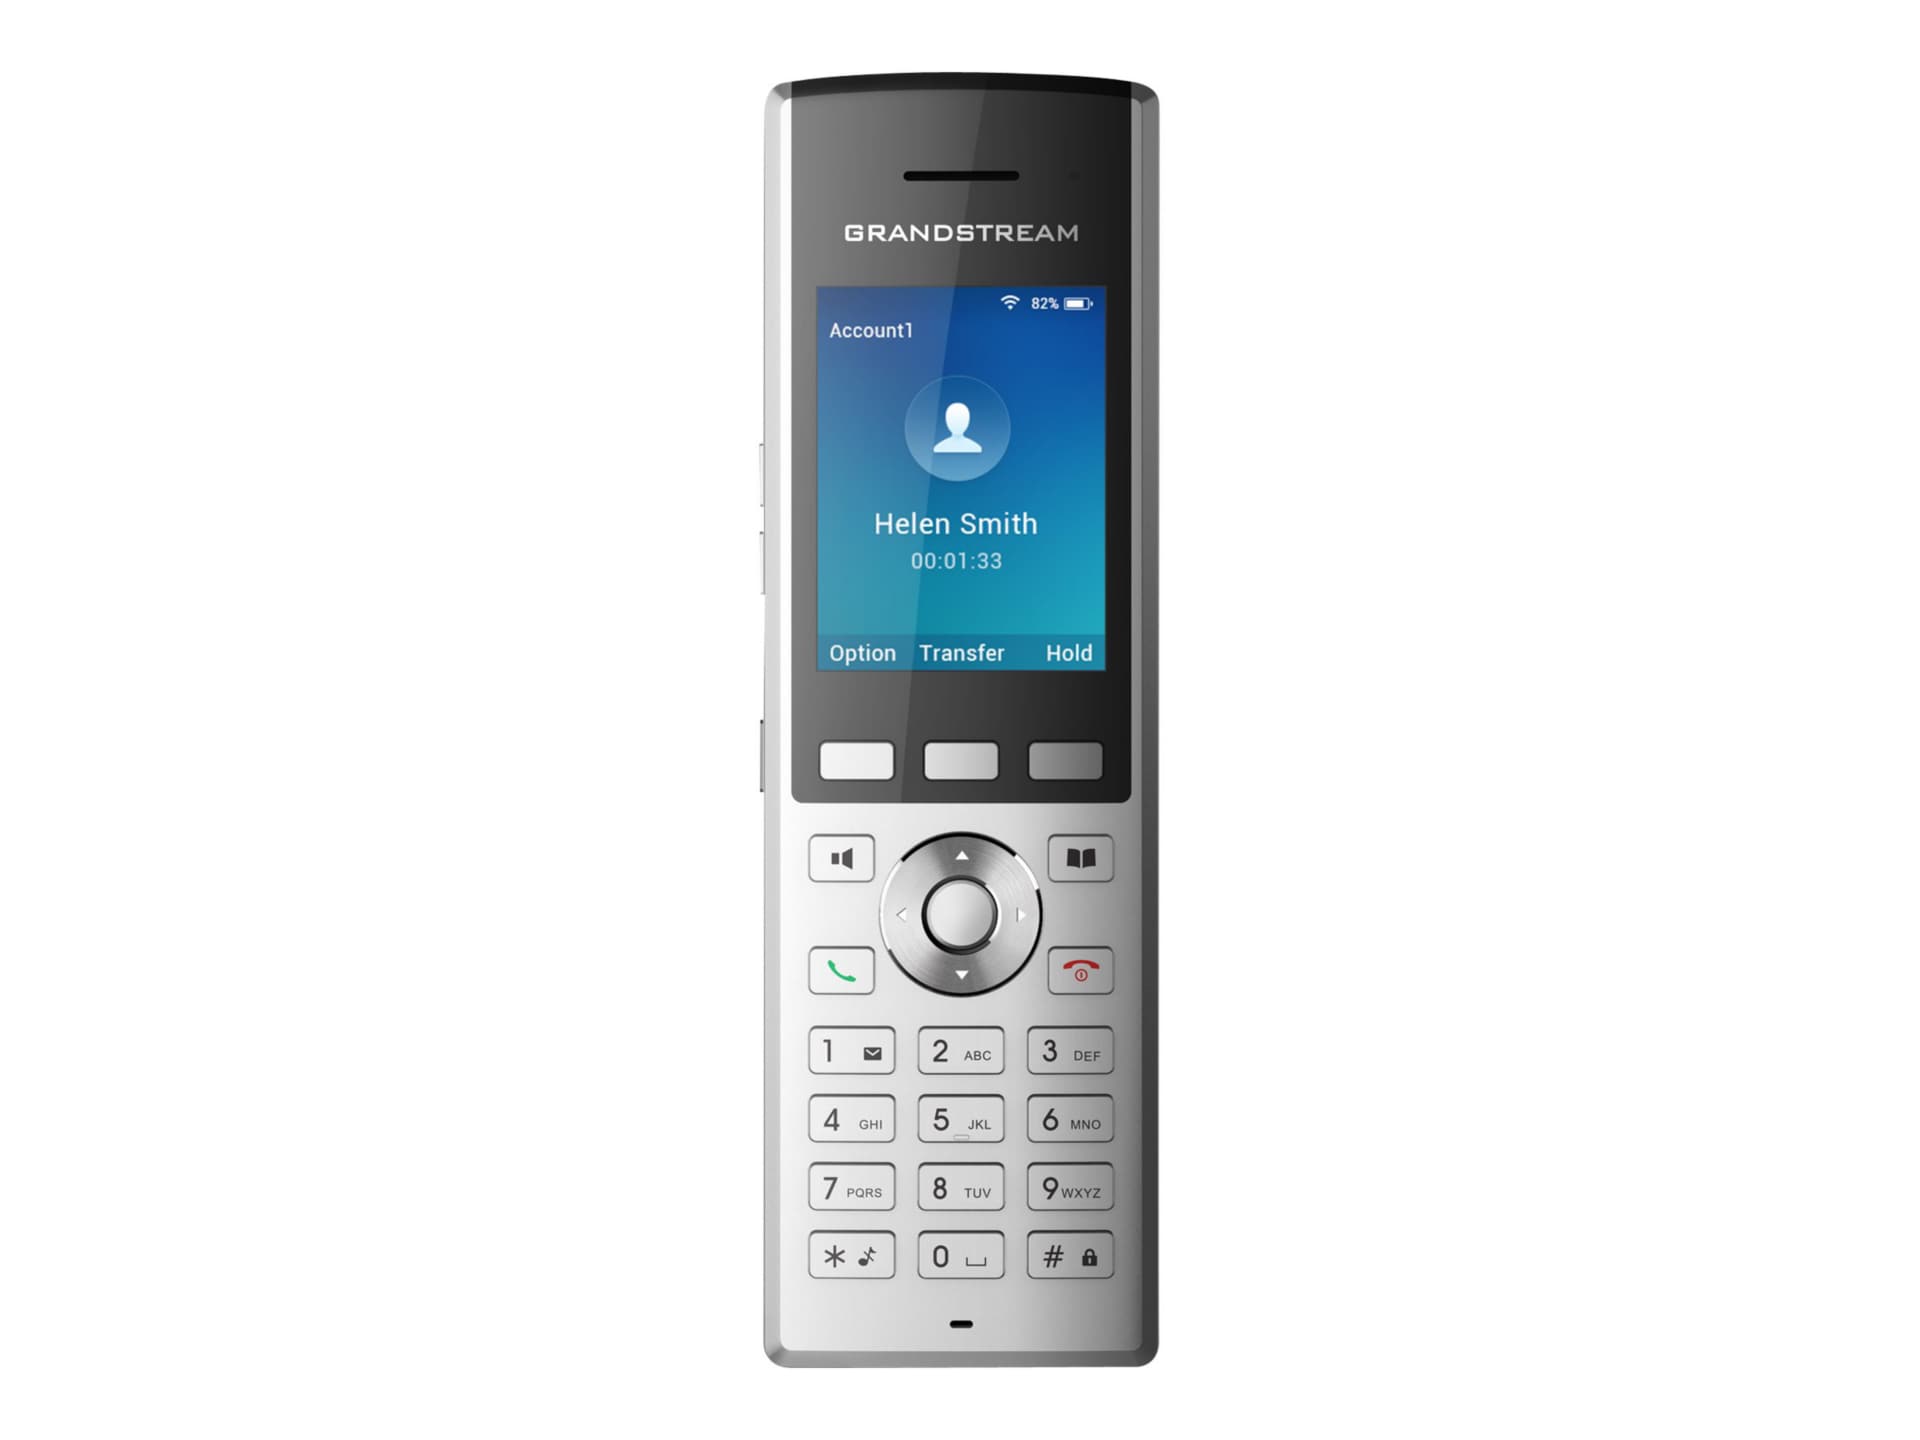 Grandstream WP820 - VoIP phone - with Bluetooth interface - 3-way call capability